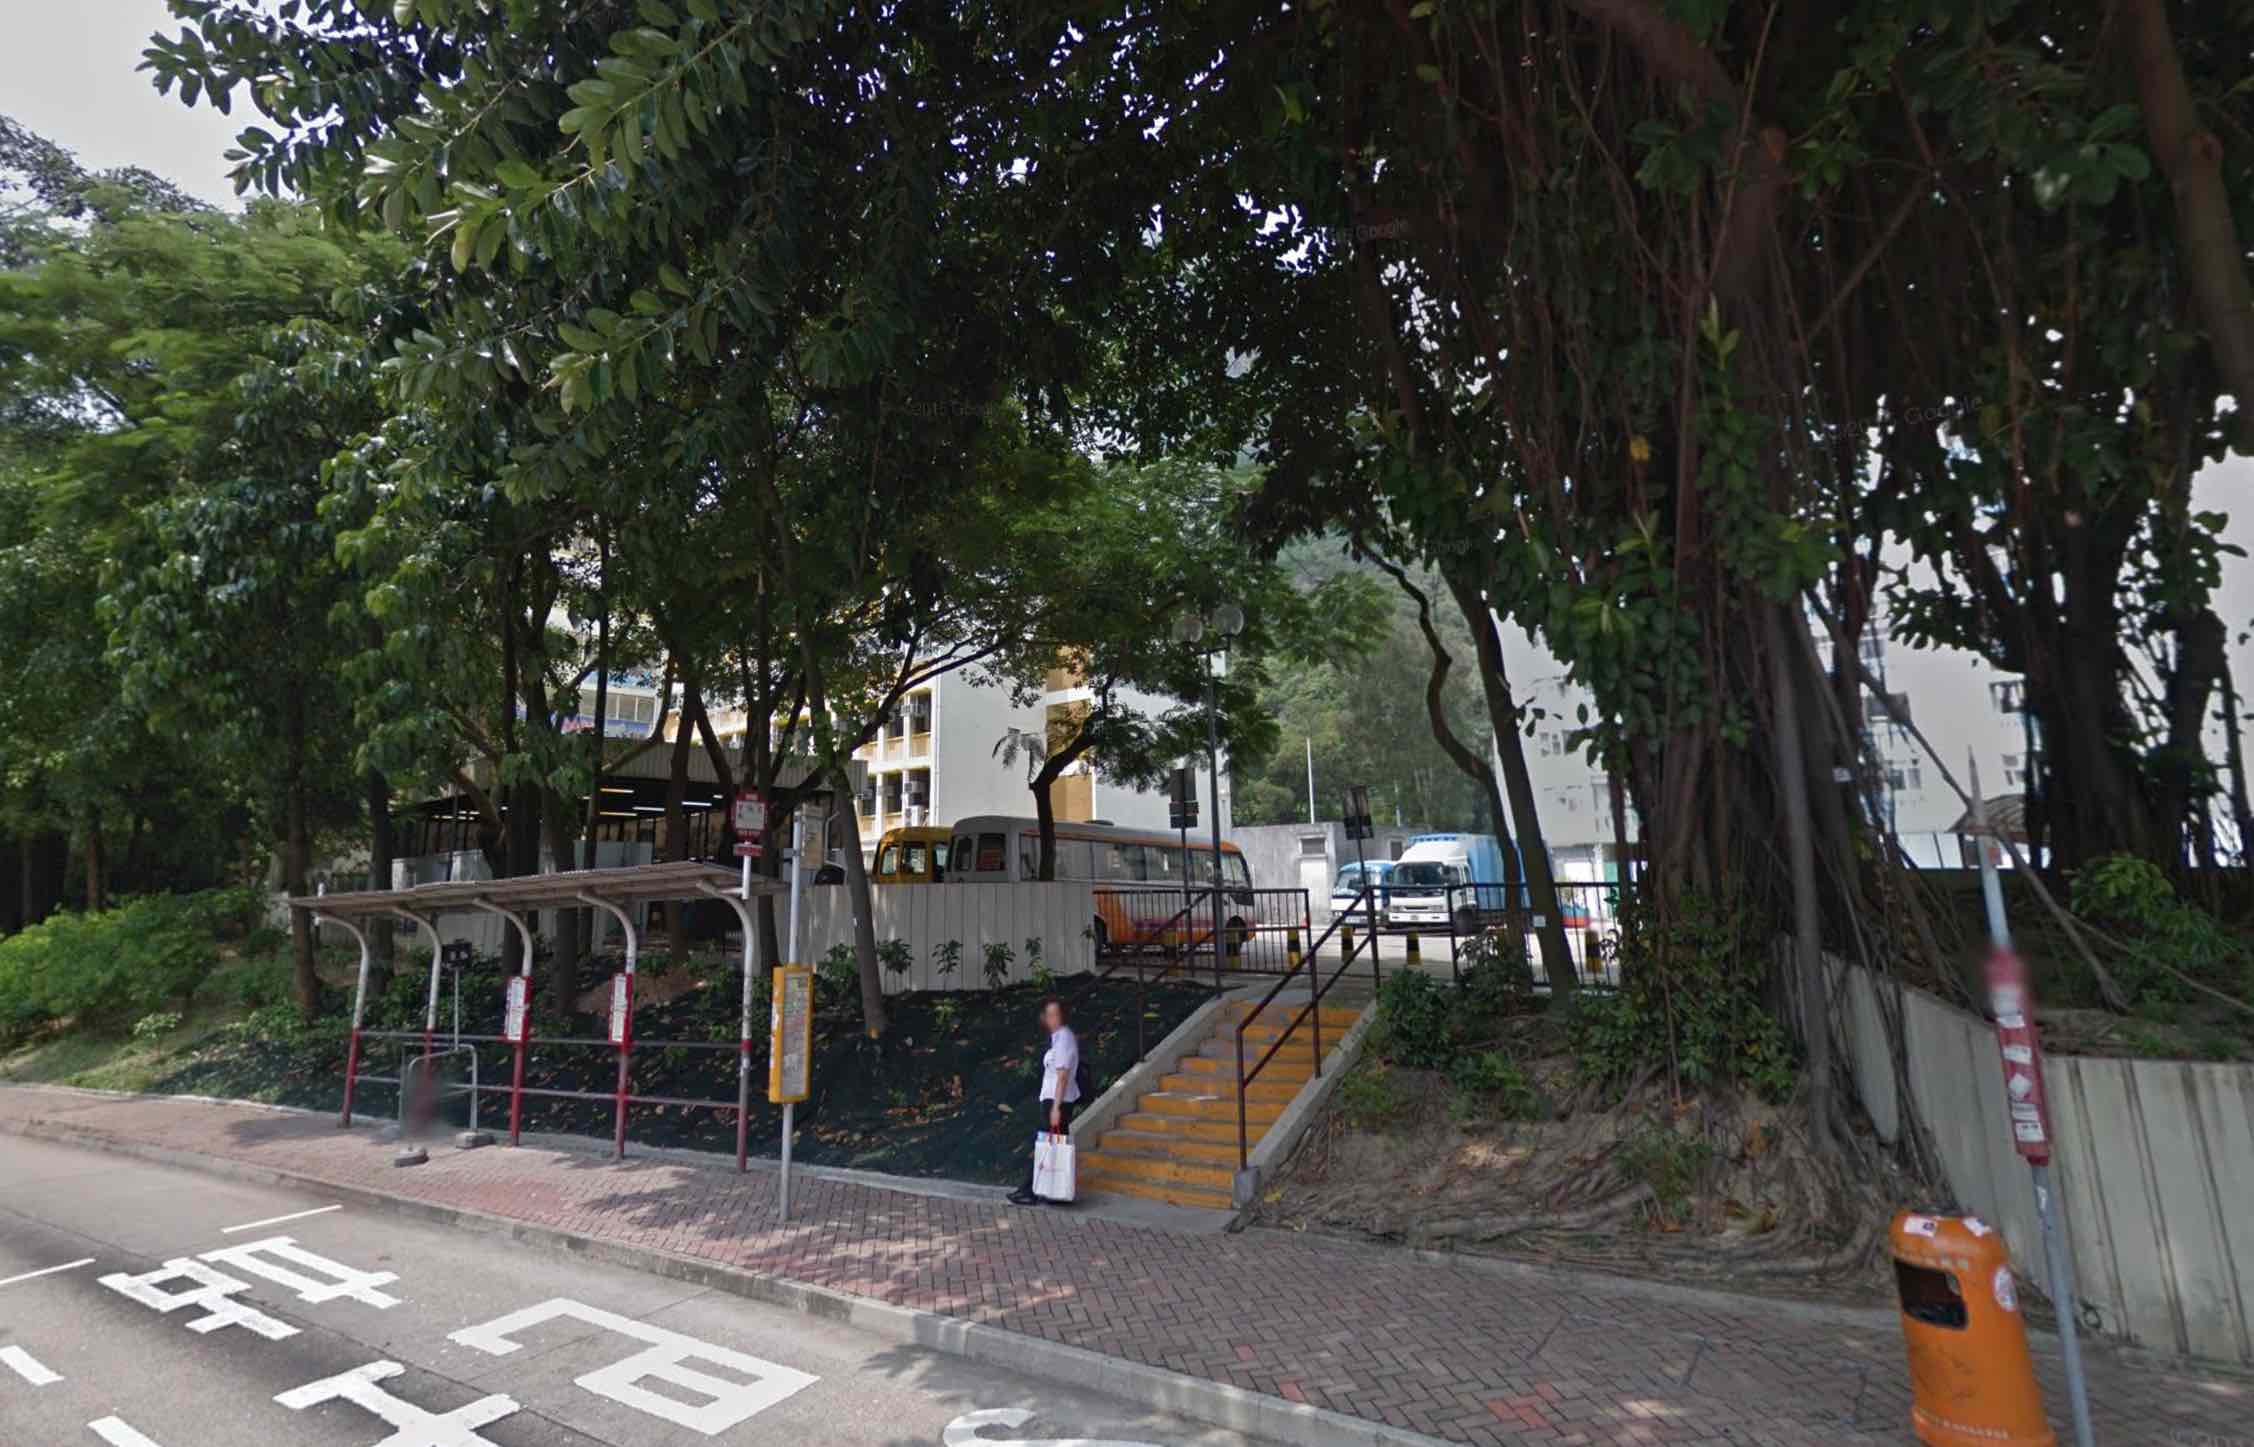 The site of the falling tree branch that killed an Indonesian domestic worker yesterday. Via Google